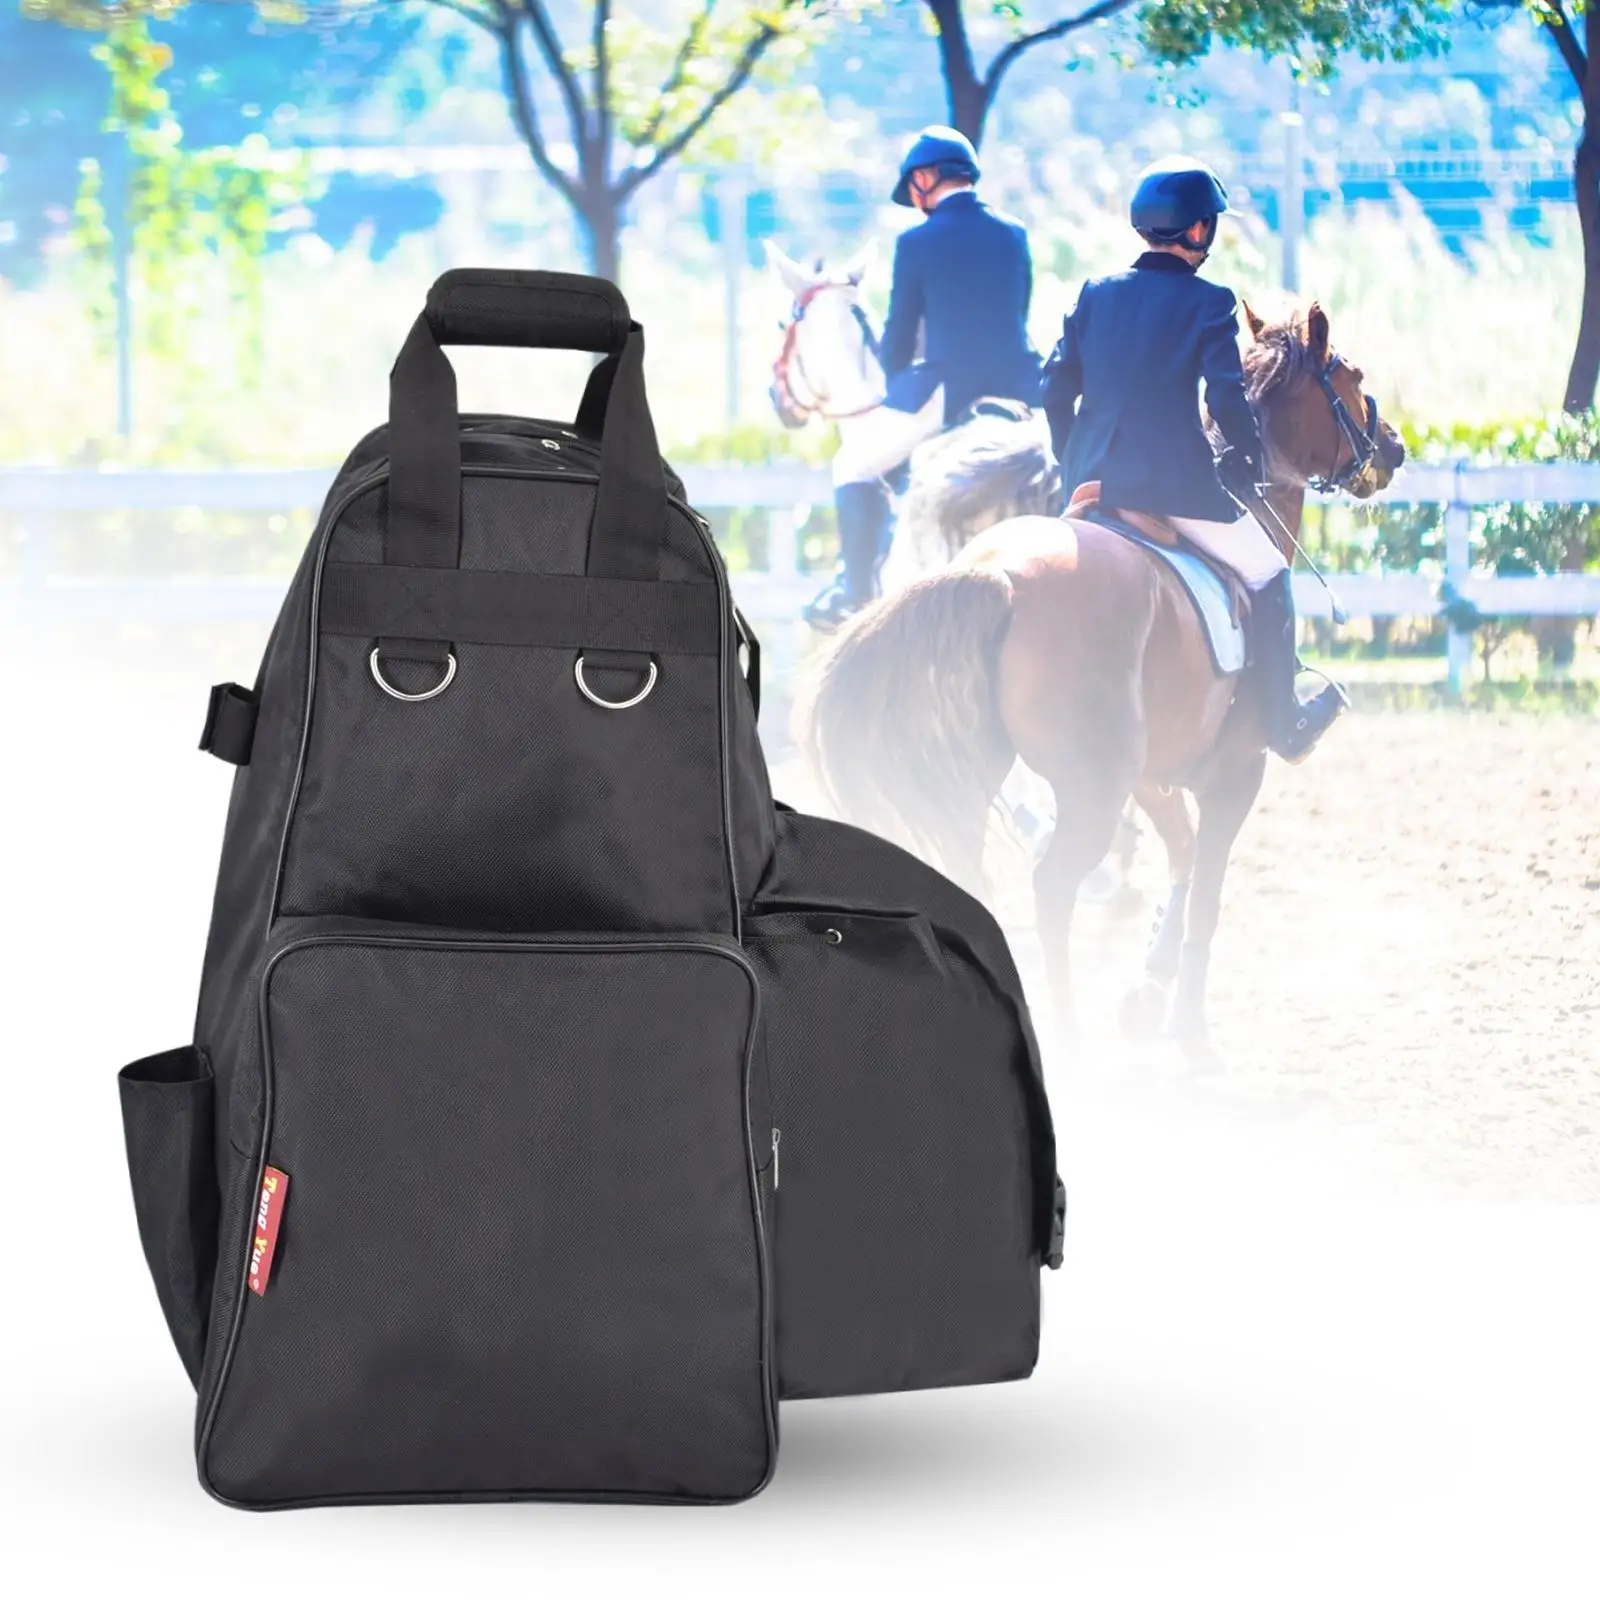 Equestrian Equipment Backpack Horse Riding Outfit Boots Gloves Pants Leg Guards Storage Bag Large Capacity Carrier